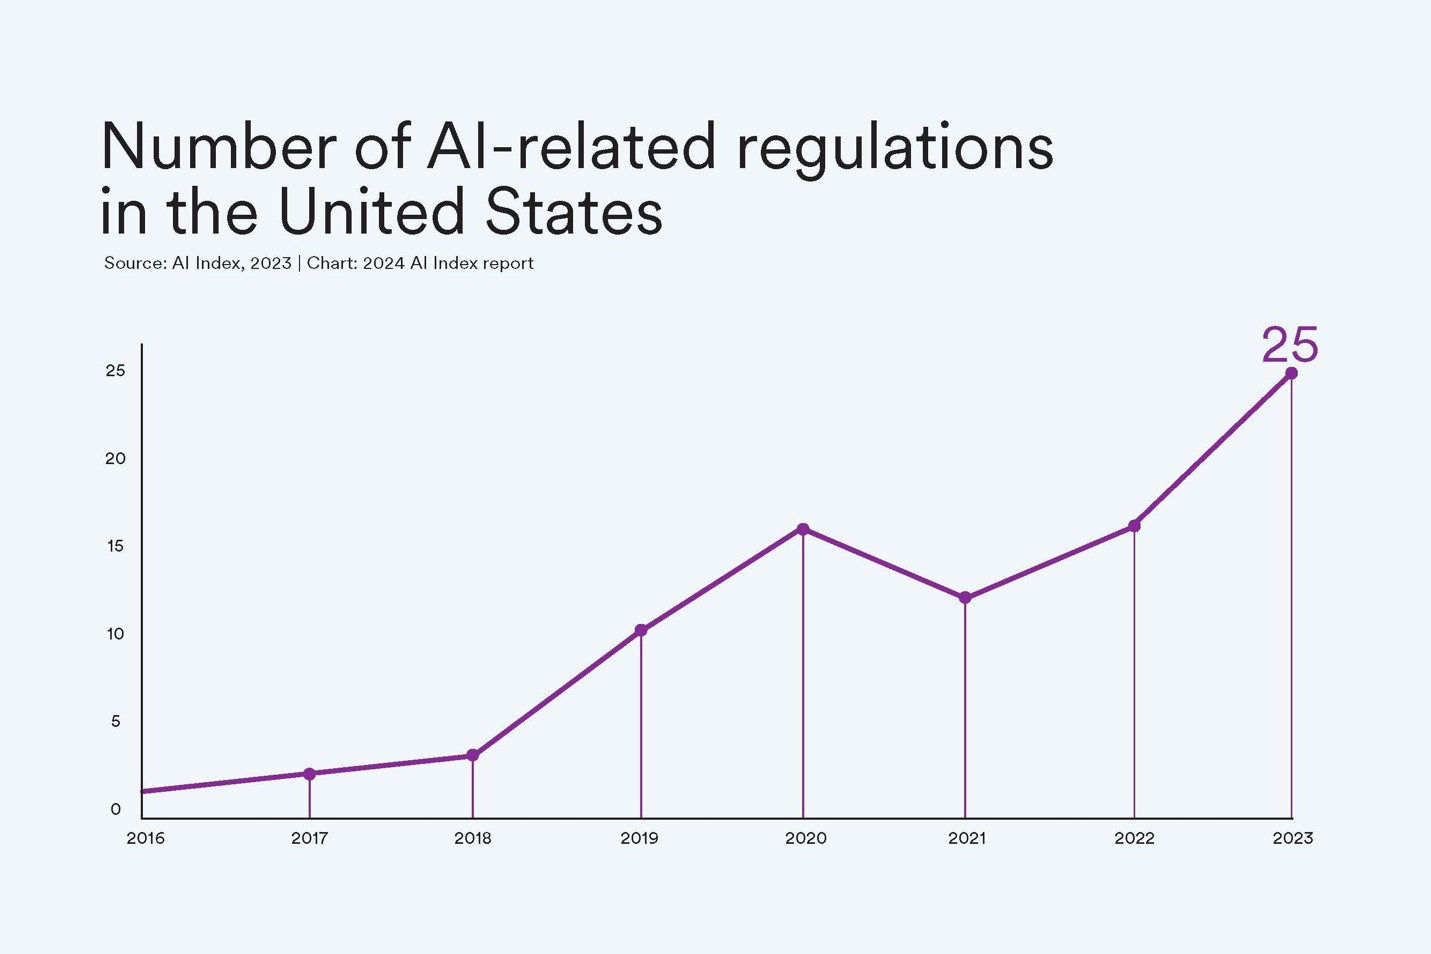 A chart showing the number of AI-related regulations introduced in the United States from 2016-2023